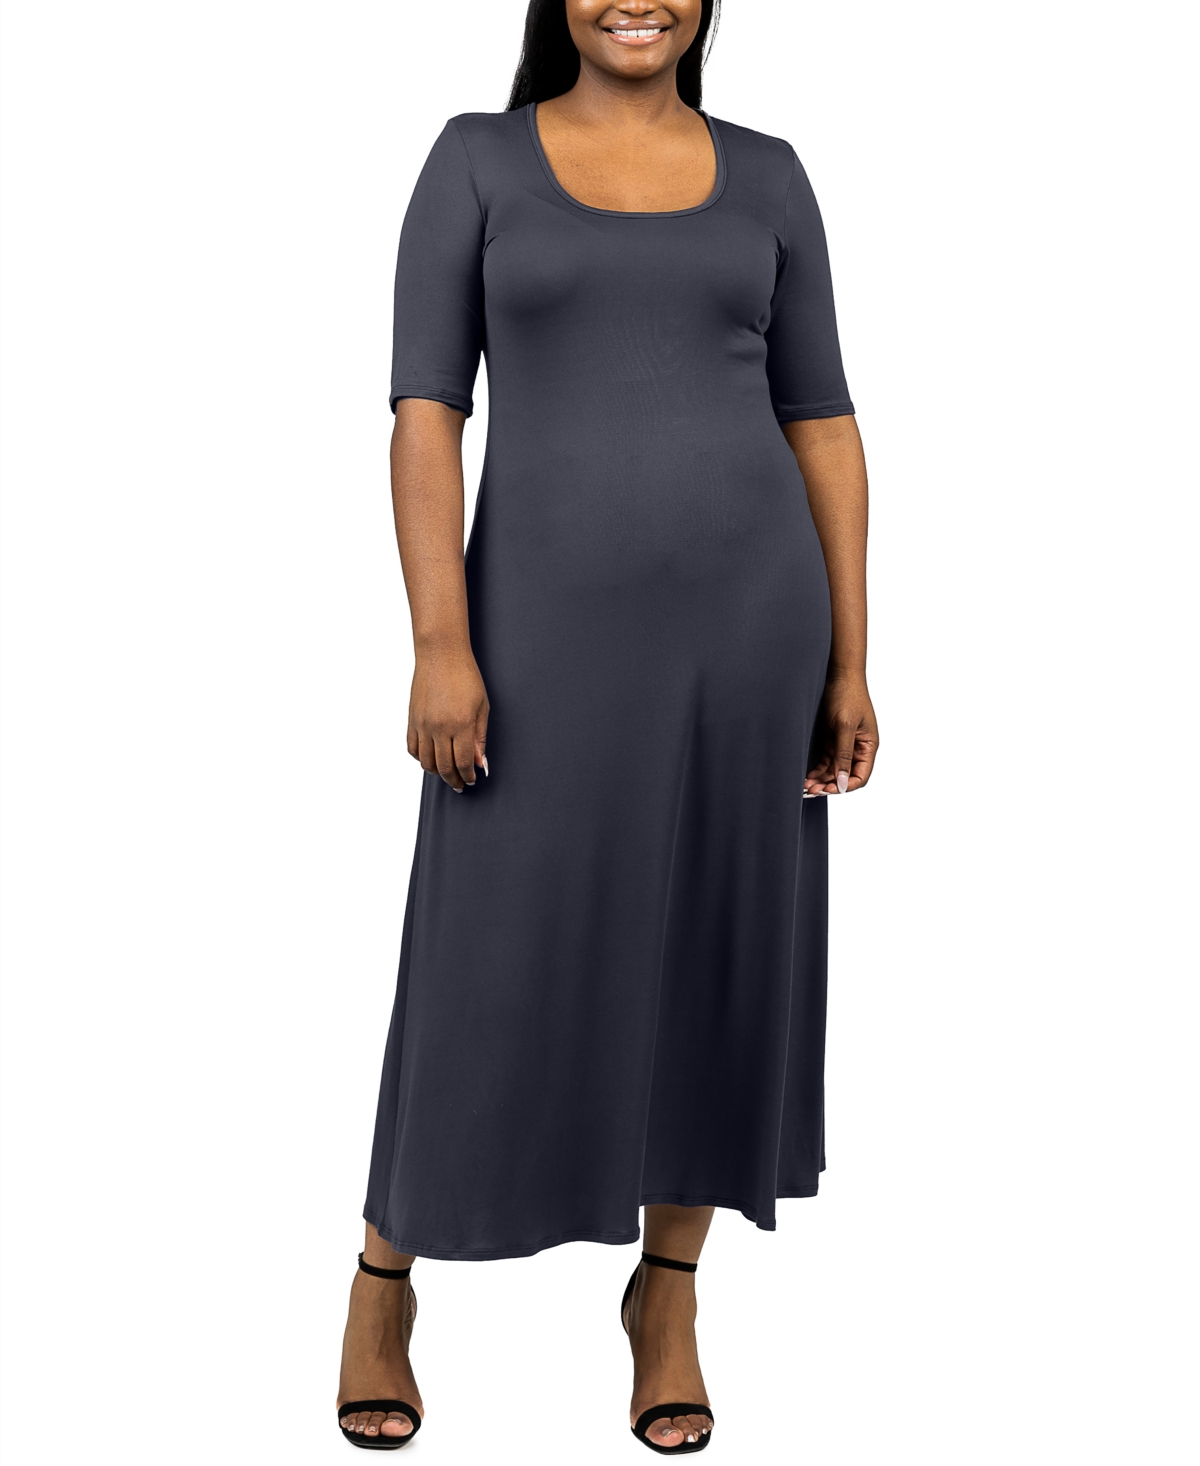 24seven Comfort Apparel Plus Size Elbow Length Sleeve Maxi Dress In Charcoal